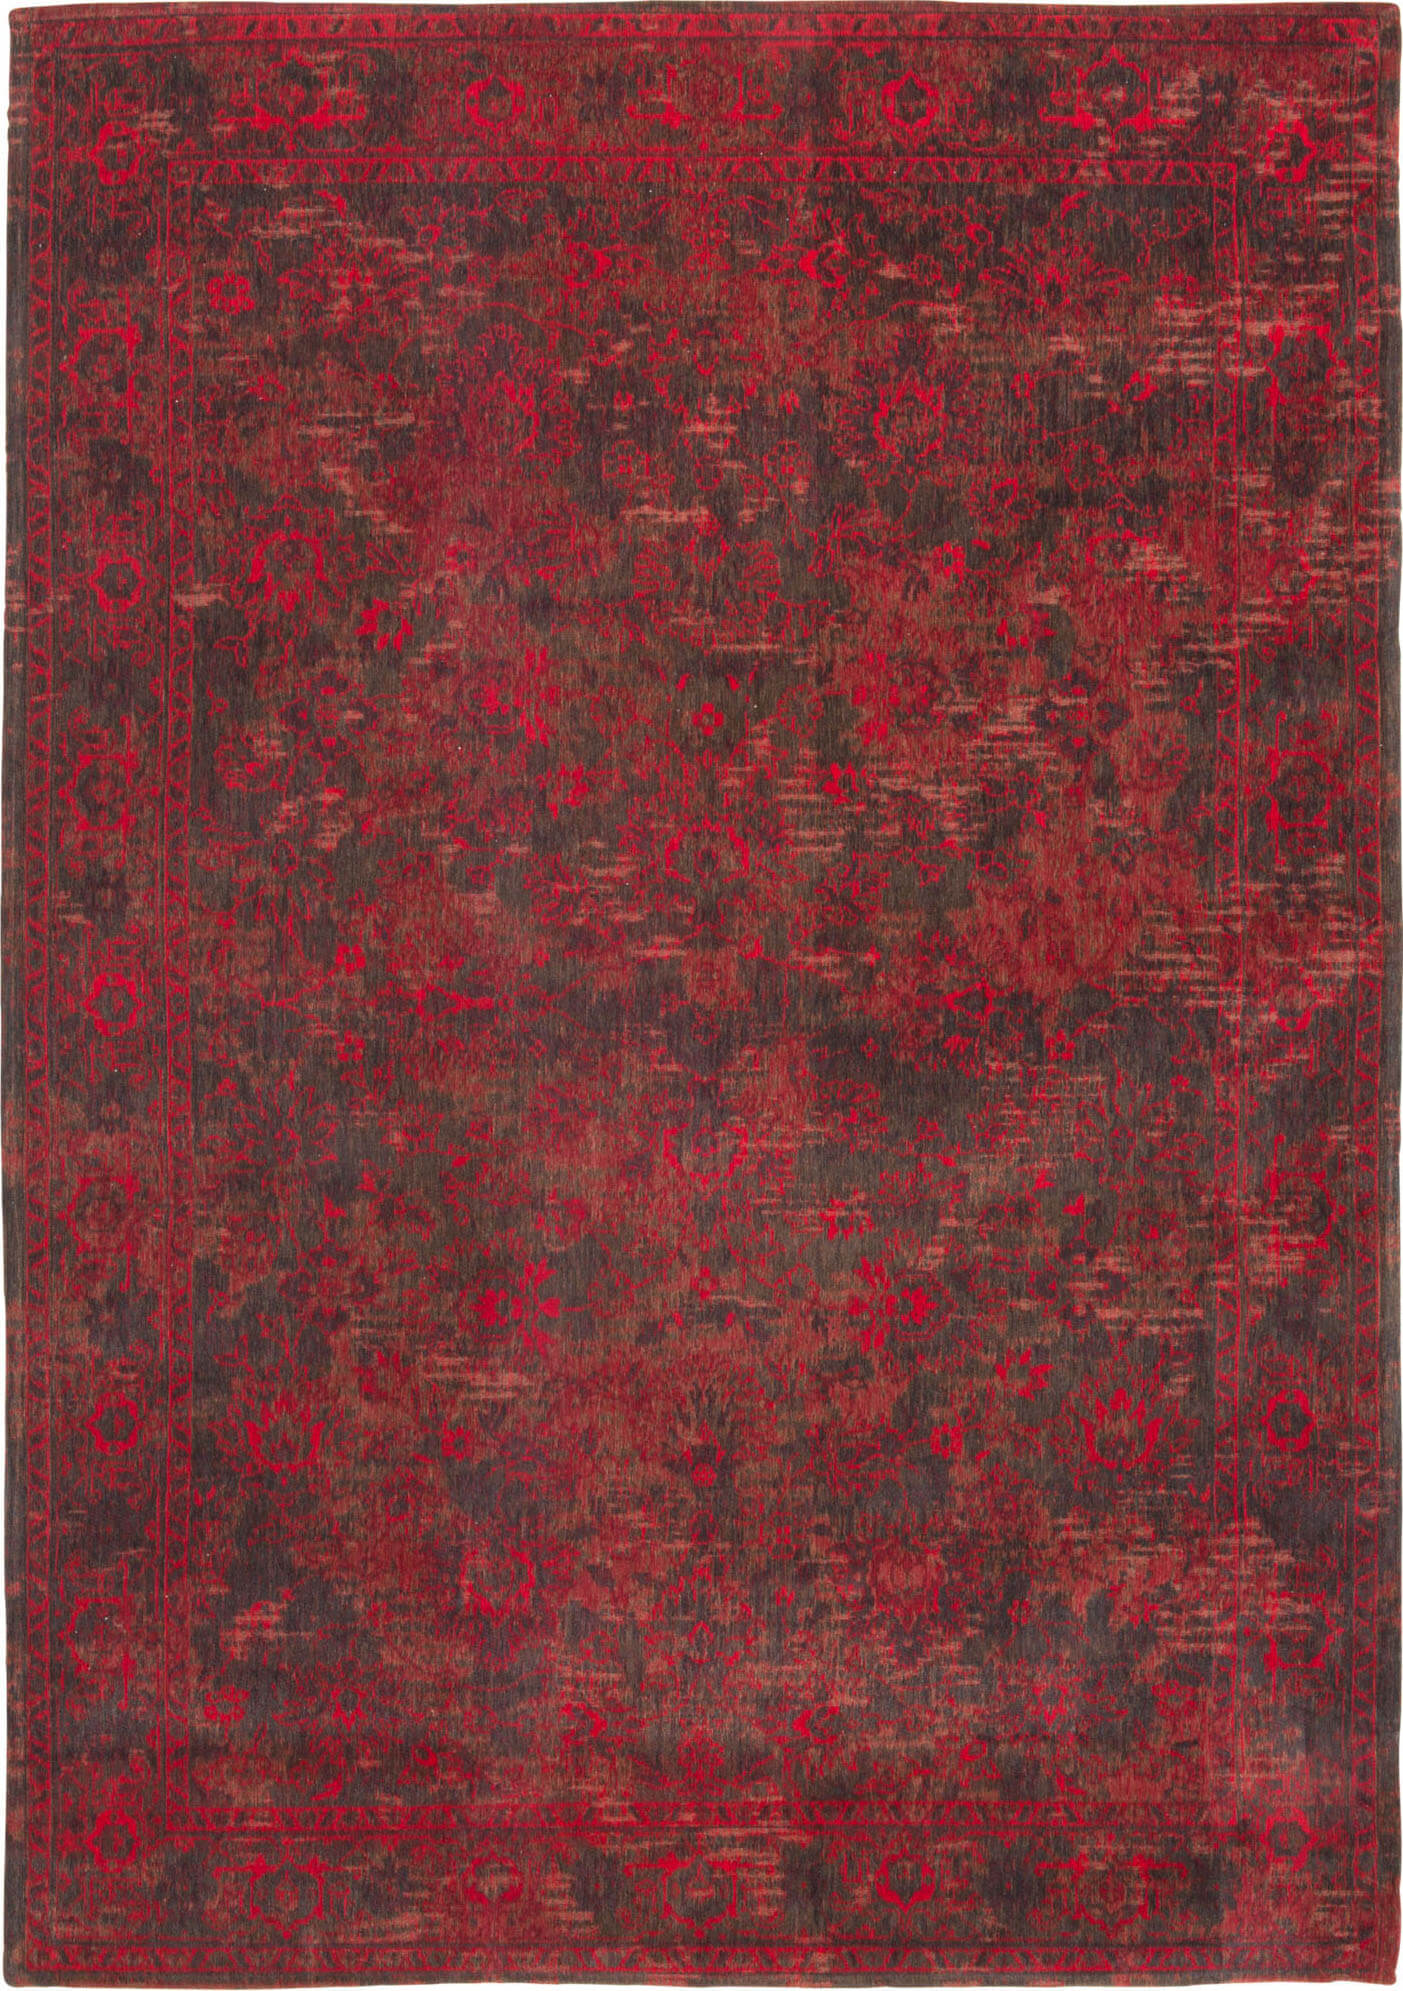 Grey Red Bright Persian Vintage Rug ☞ Size: 60 x 90 cm